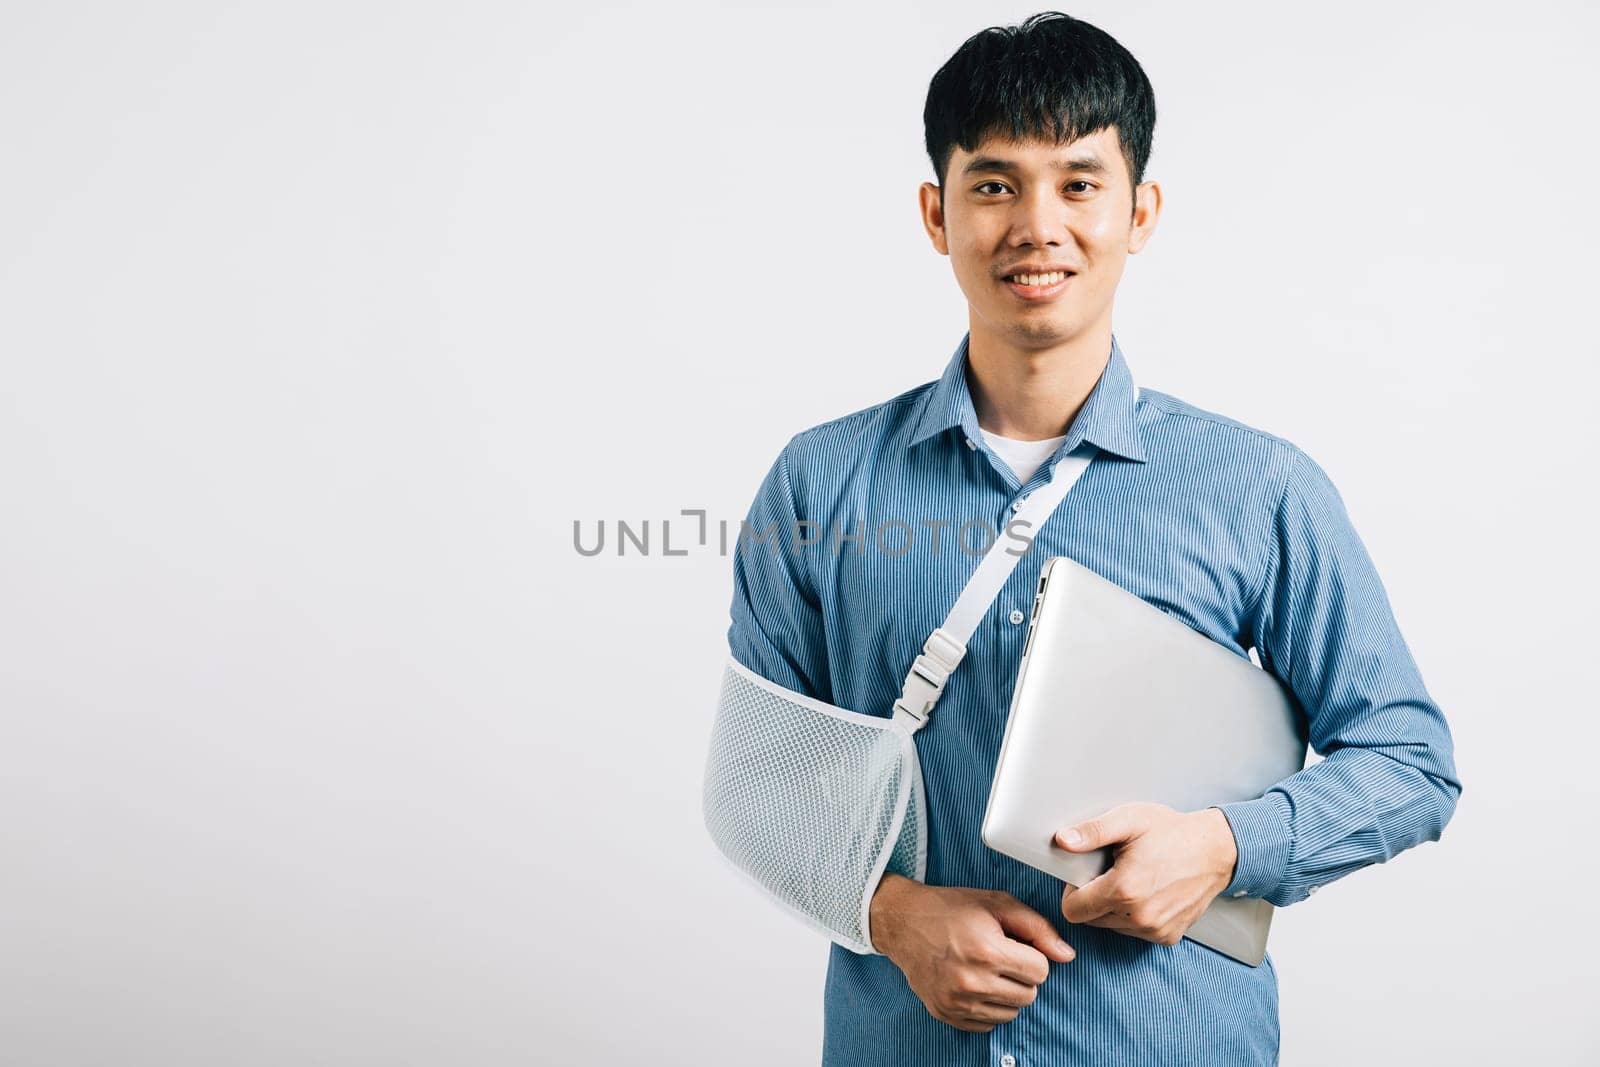 A resilient business professional, with a broken arm, utilizes a splint while working on a laptop. Studio shot isolated on white, highlighting determination and recovery. Copy space available.